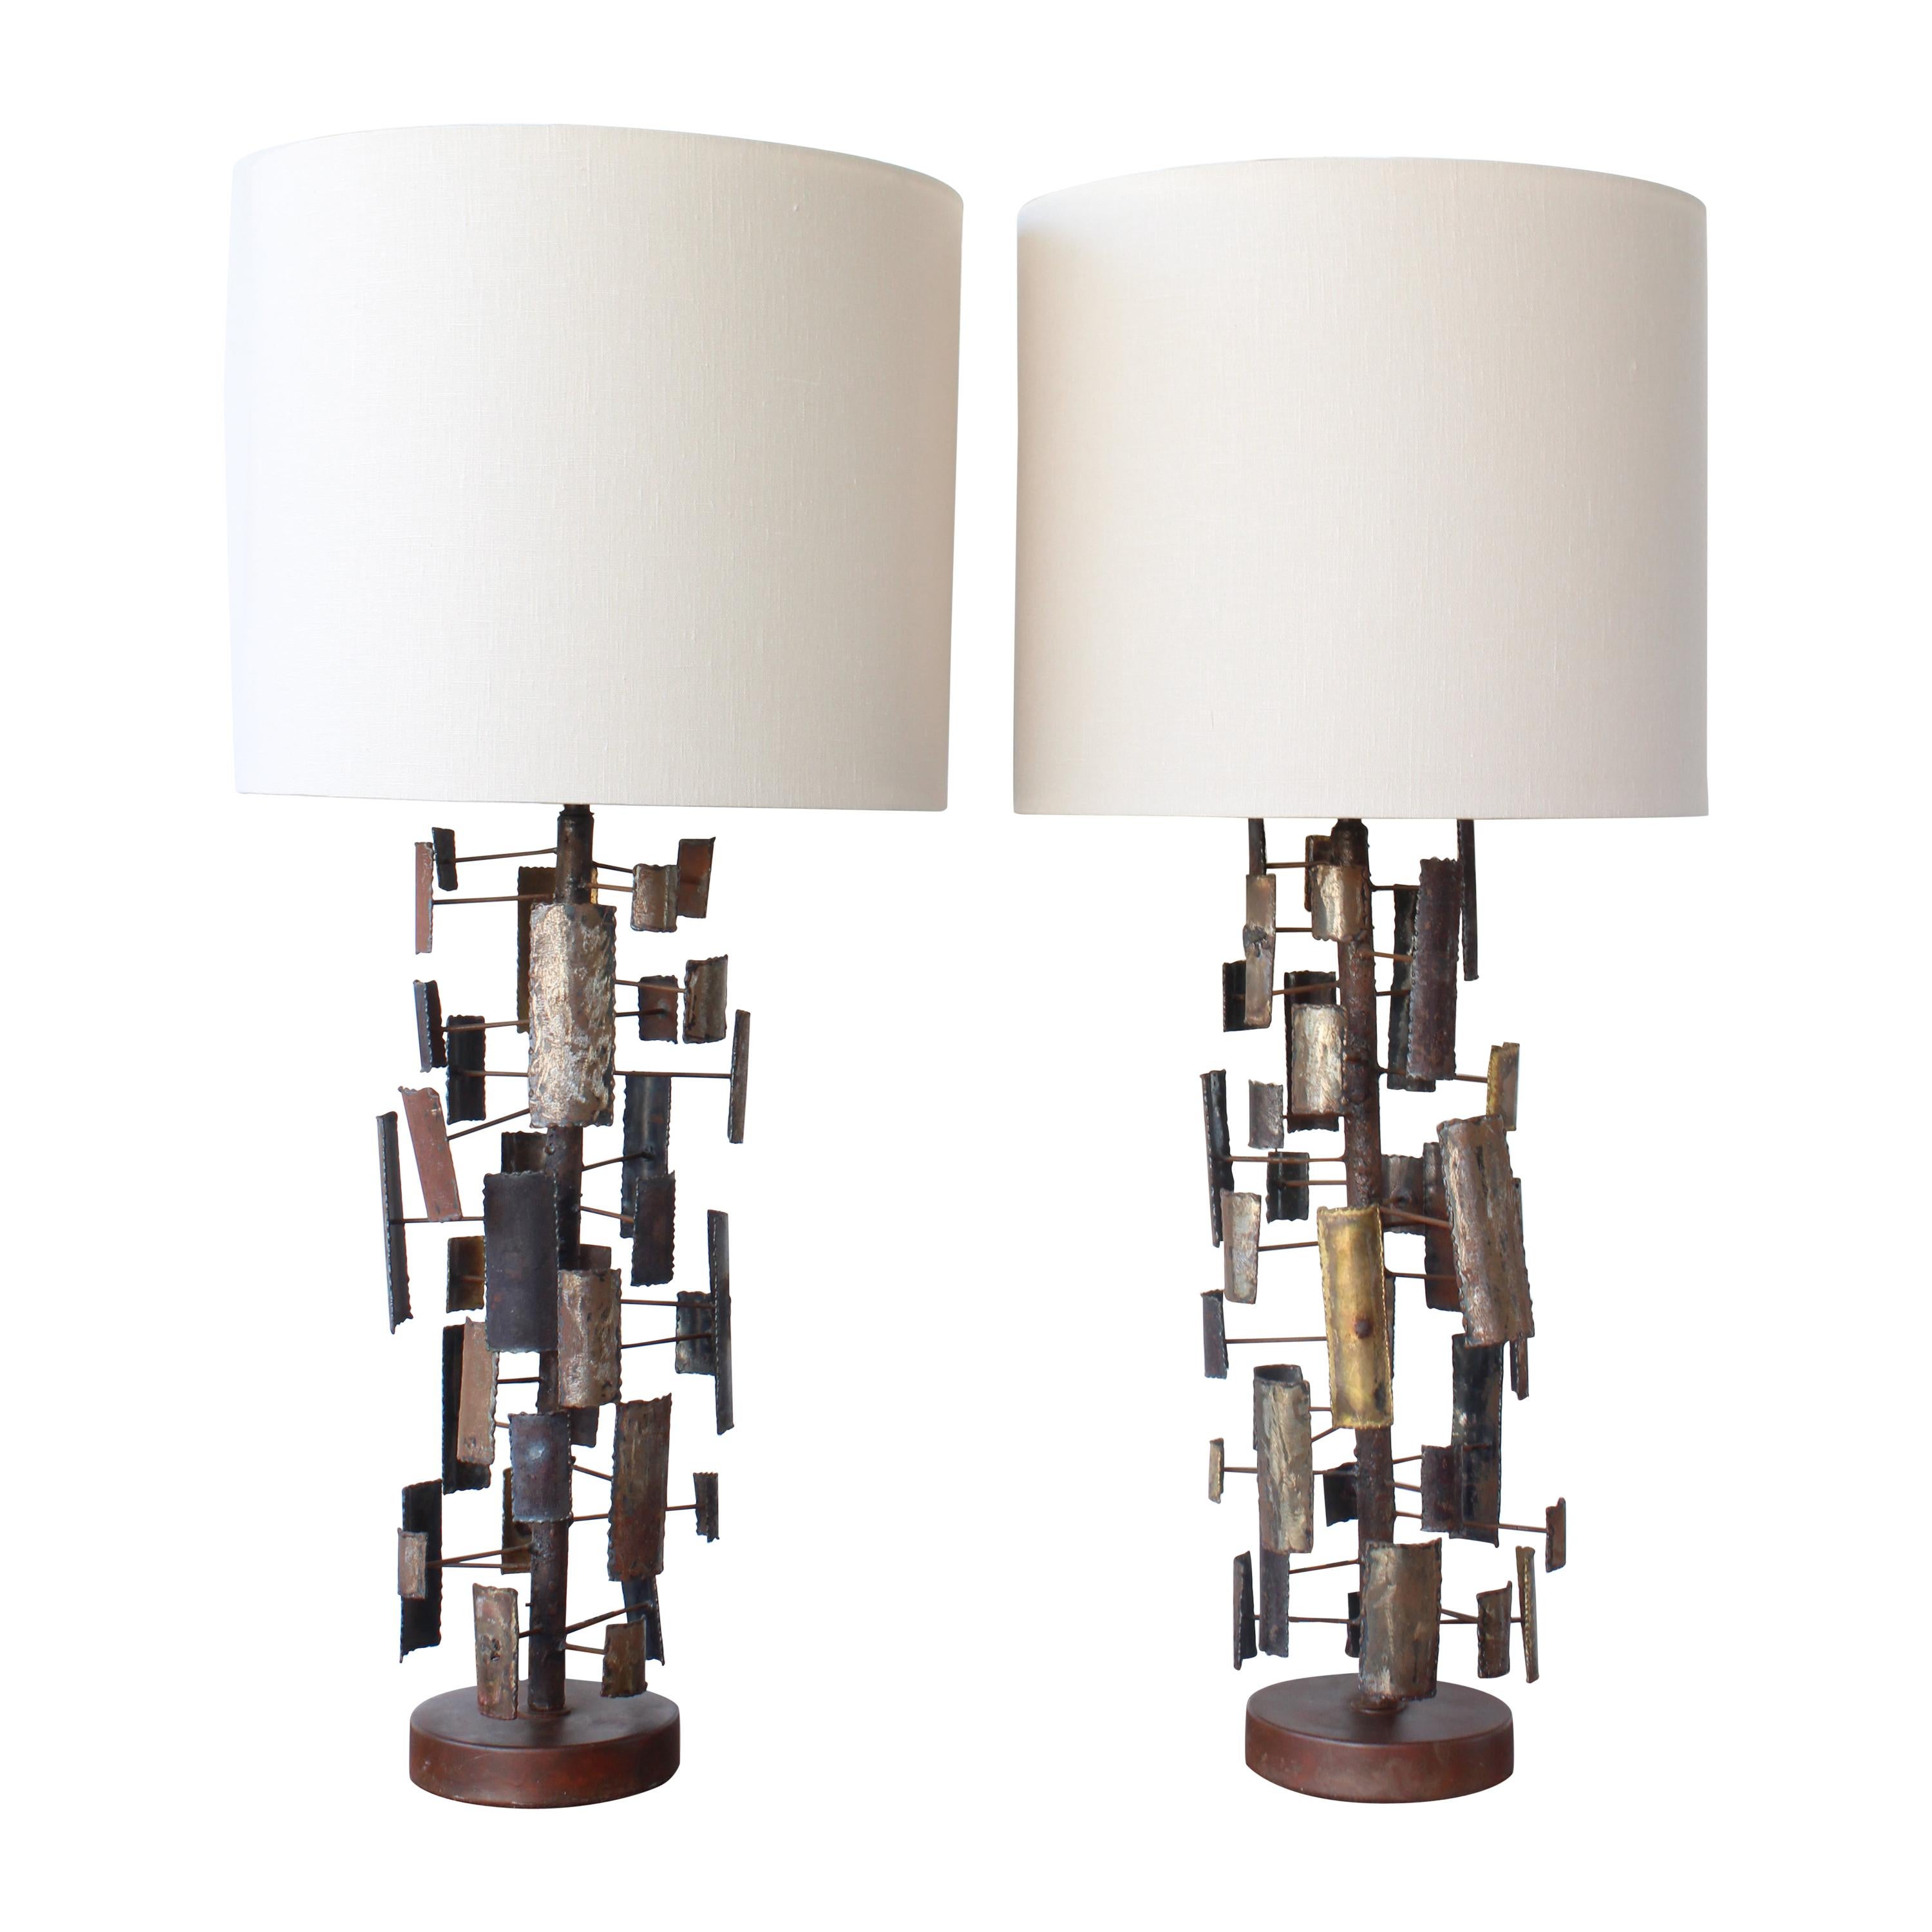 Pair of Brutalist Torch-Cut Table Lamps, U.S.A, 1960s